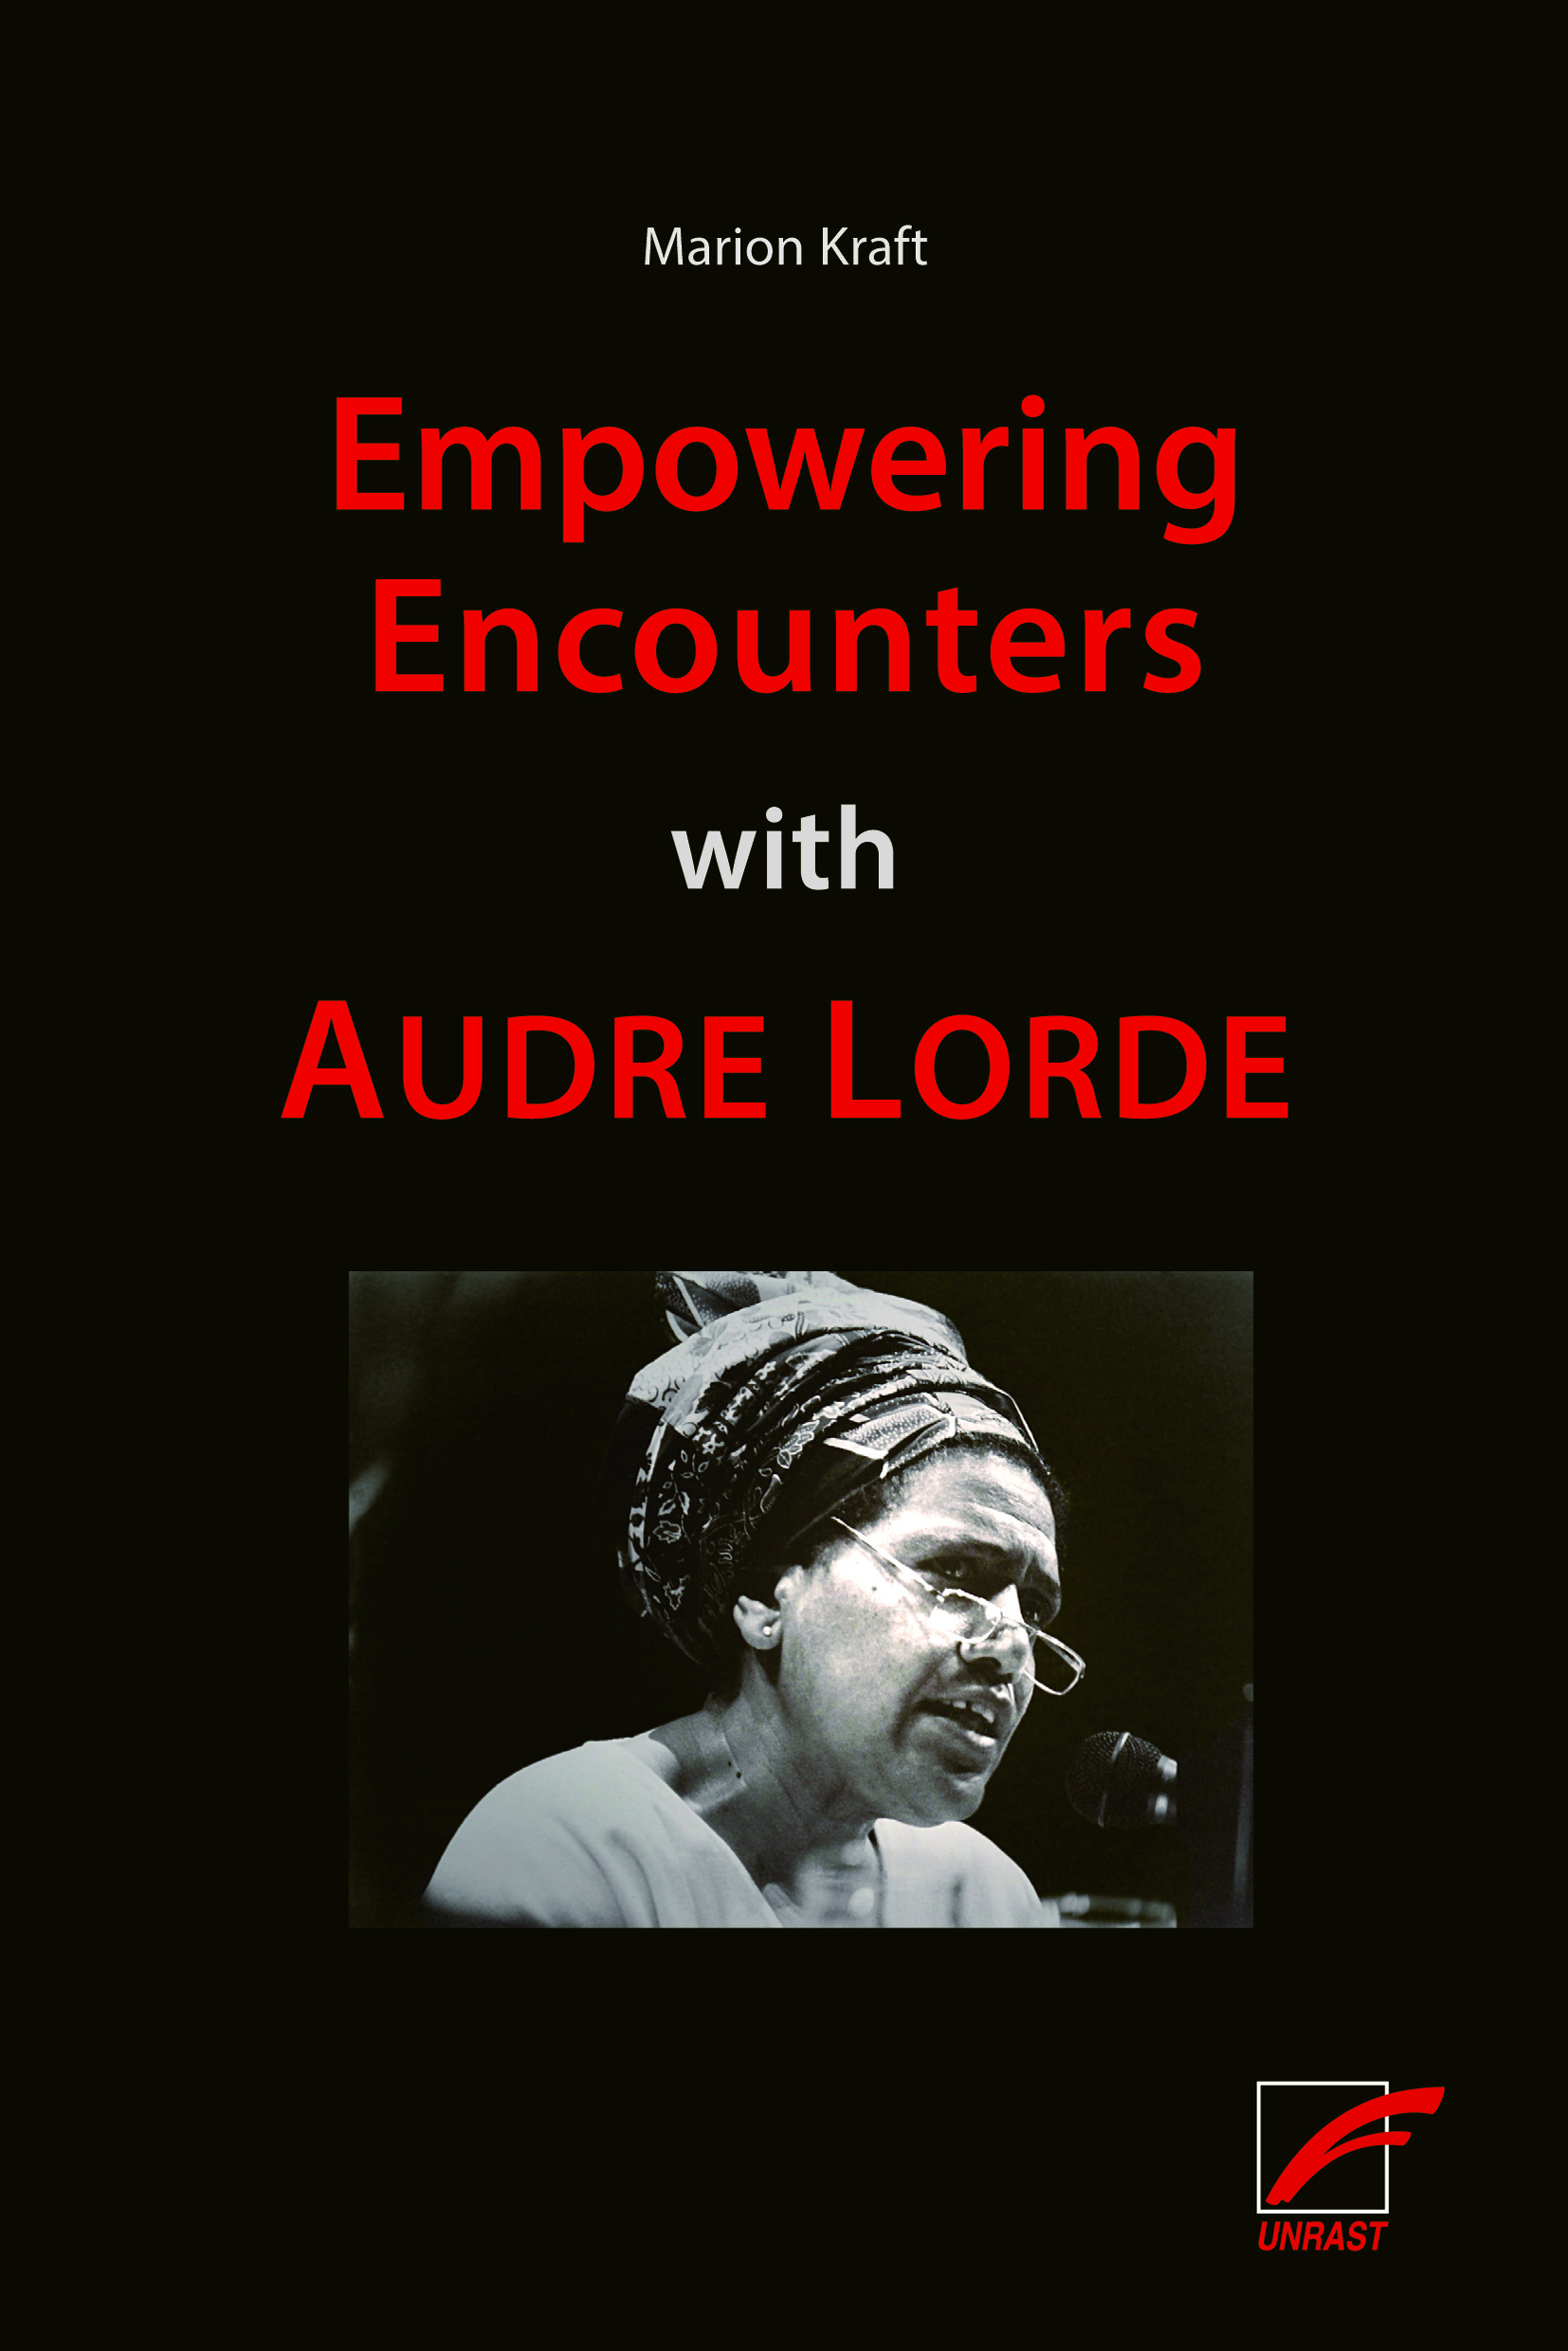 Empowering Encounters with Audre Lorde